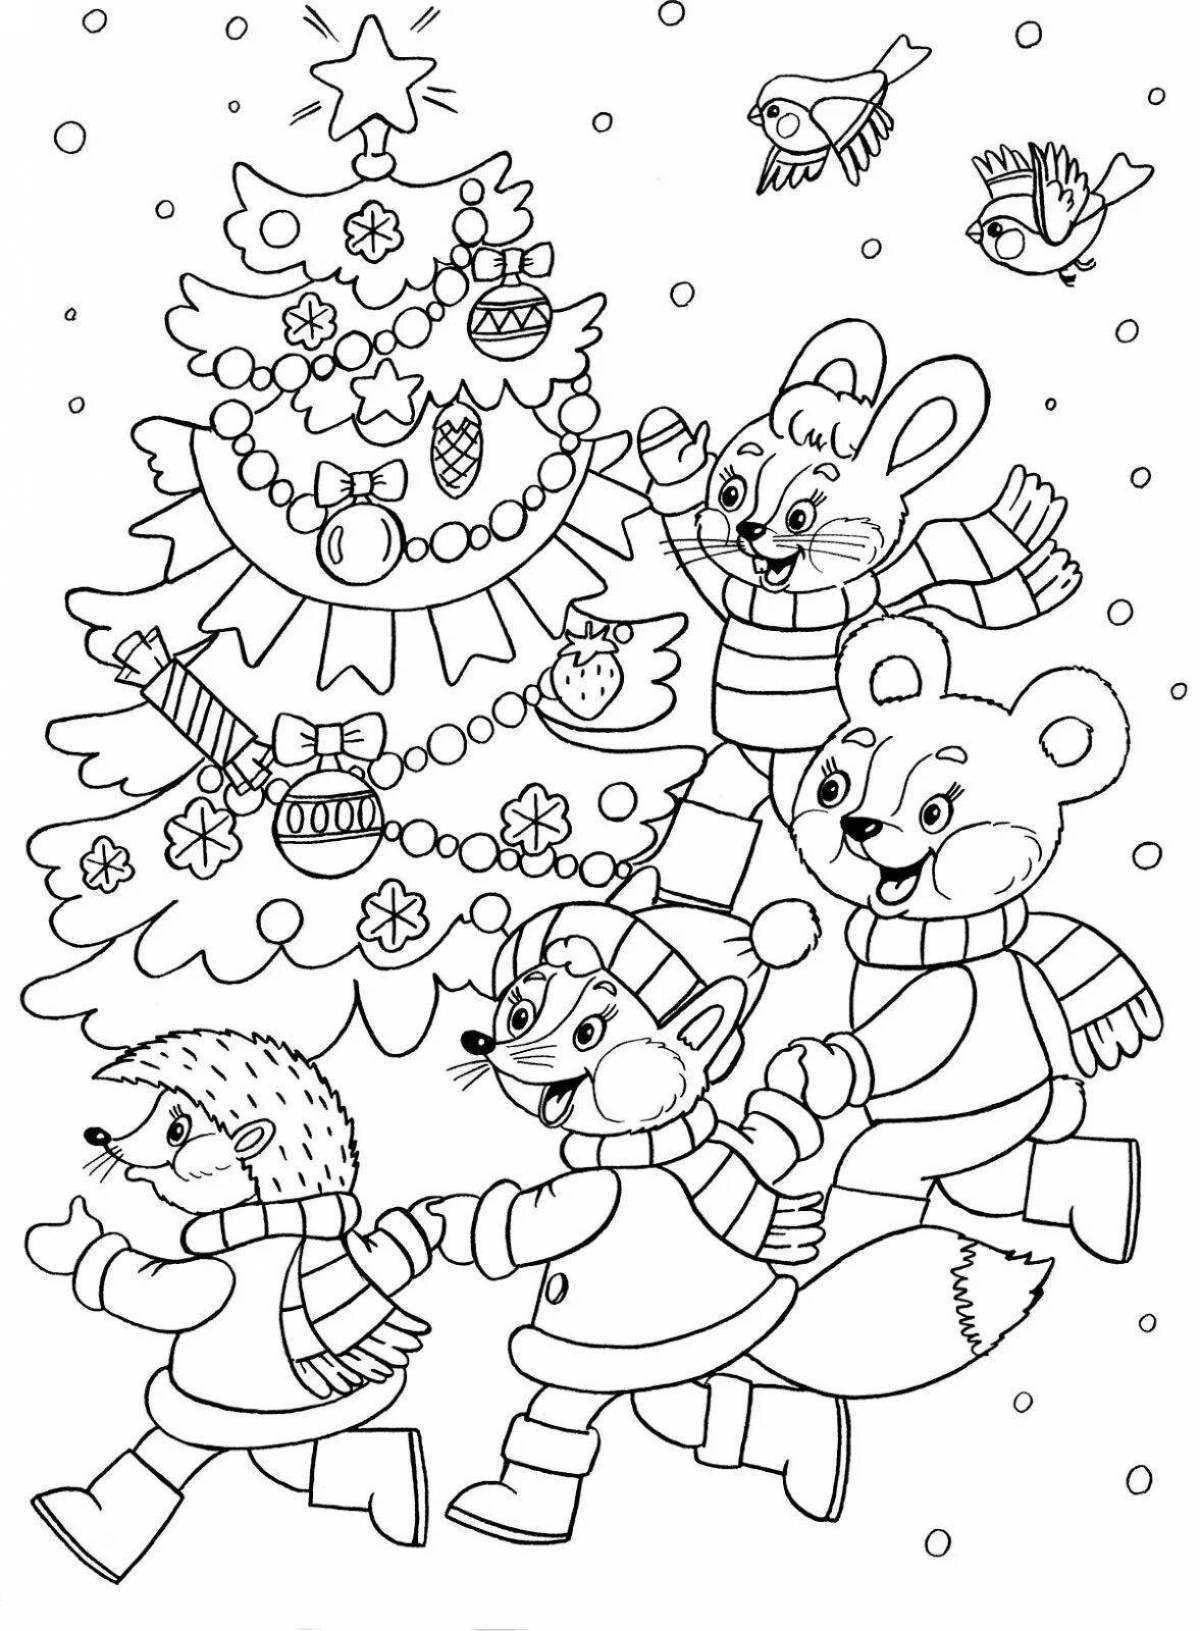 Bright Christmas coloring book for children 6 years old